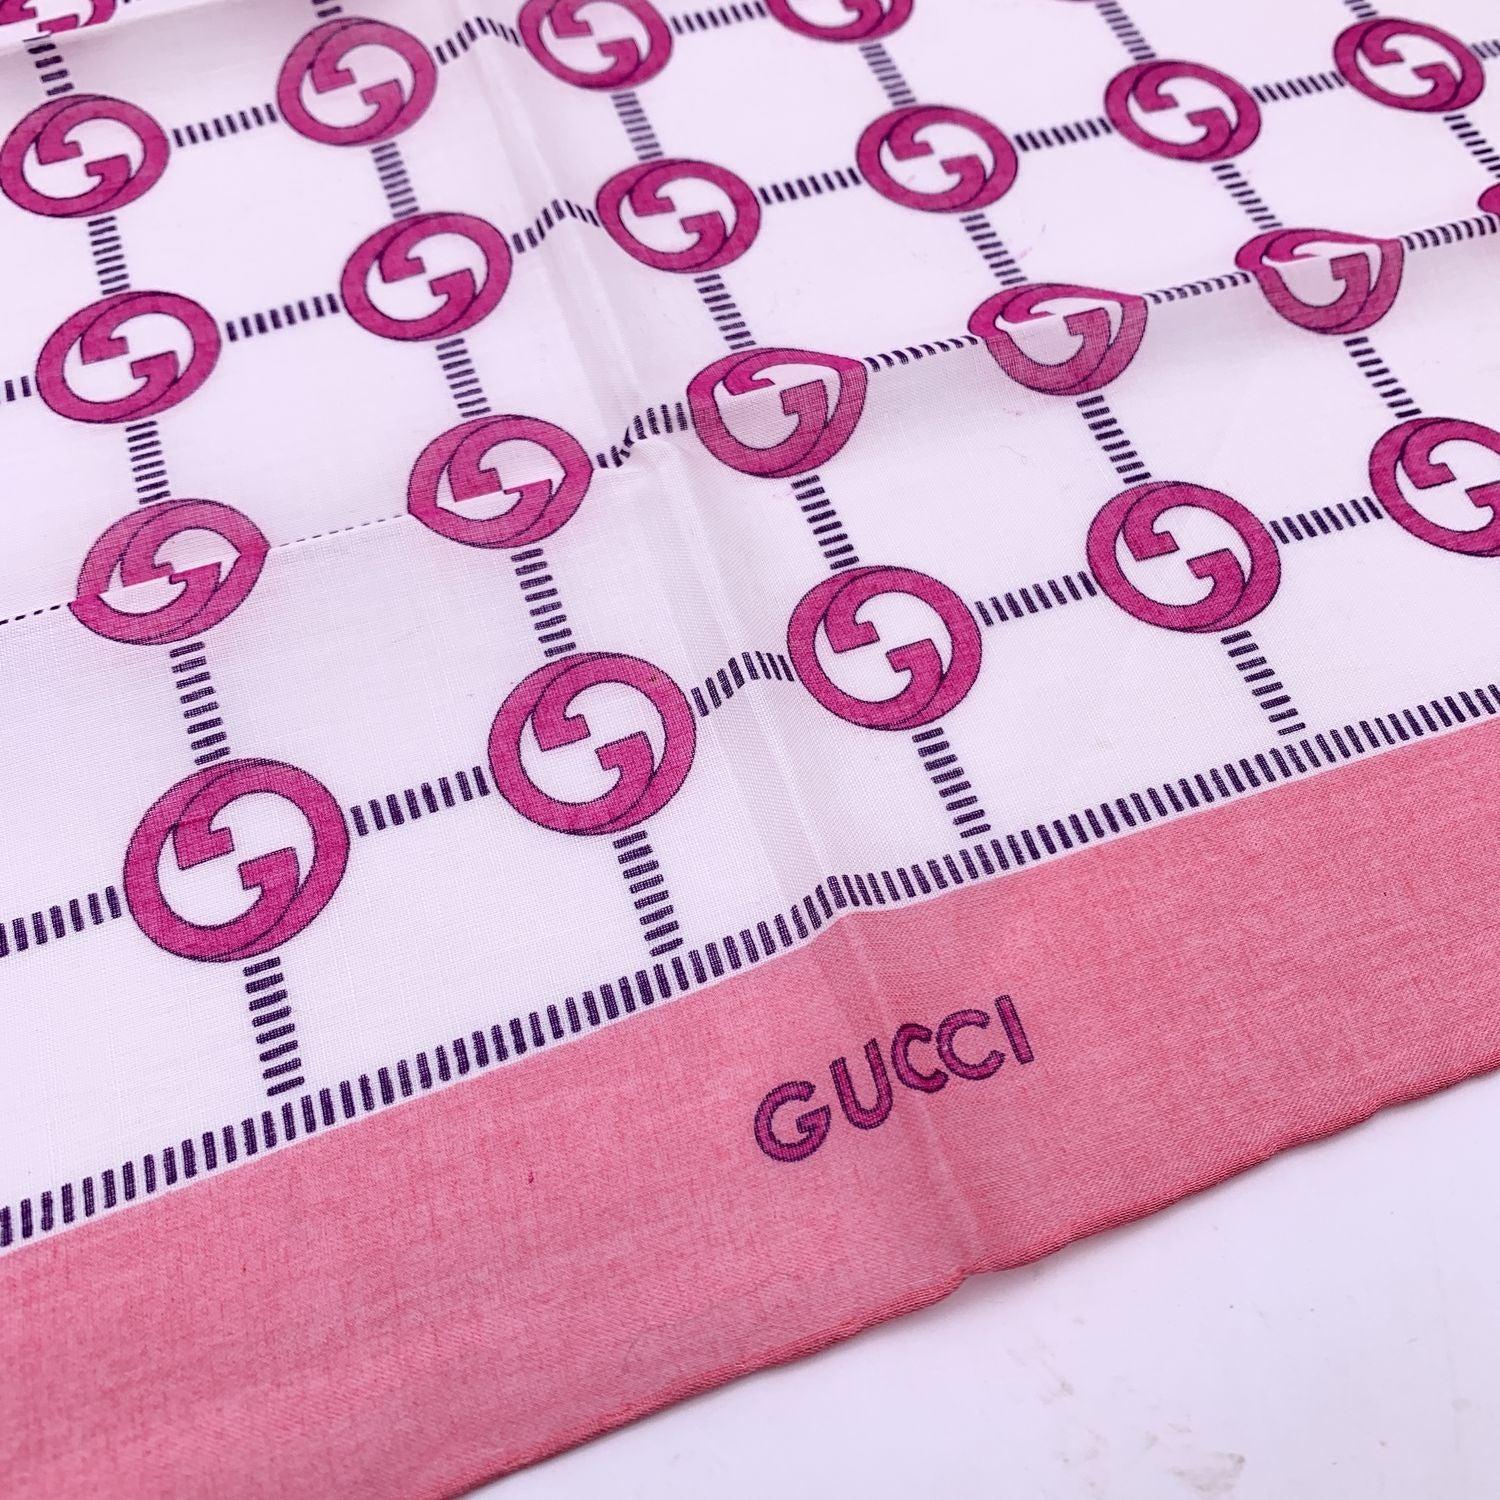 Vintage neck scarf by GUCCI. 100% Cotton. Pink GG logo pattern with pink borders. 'Gucci' signature printed on the lower center border. Approx. Measurements: 16.5 x 16.5 inches - 42 x 42 cm Details MATERIAL: Cotton COLOR: Pink MODEL: n.a. GENDER: